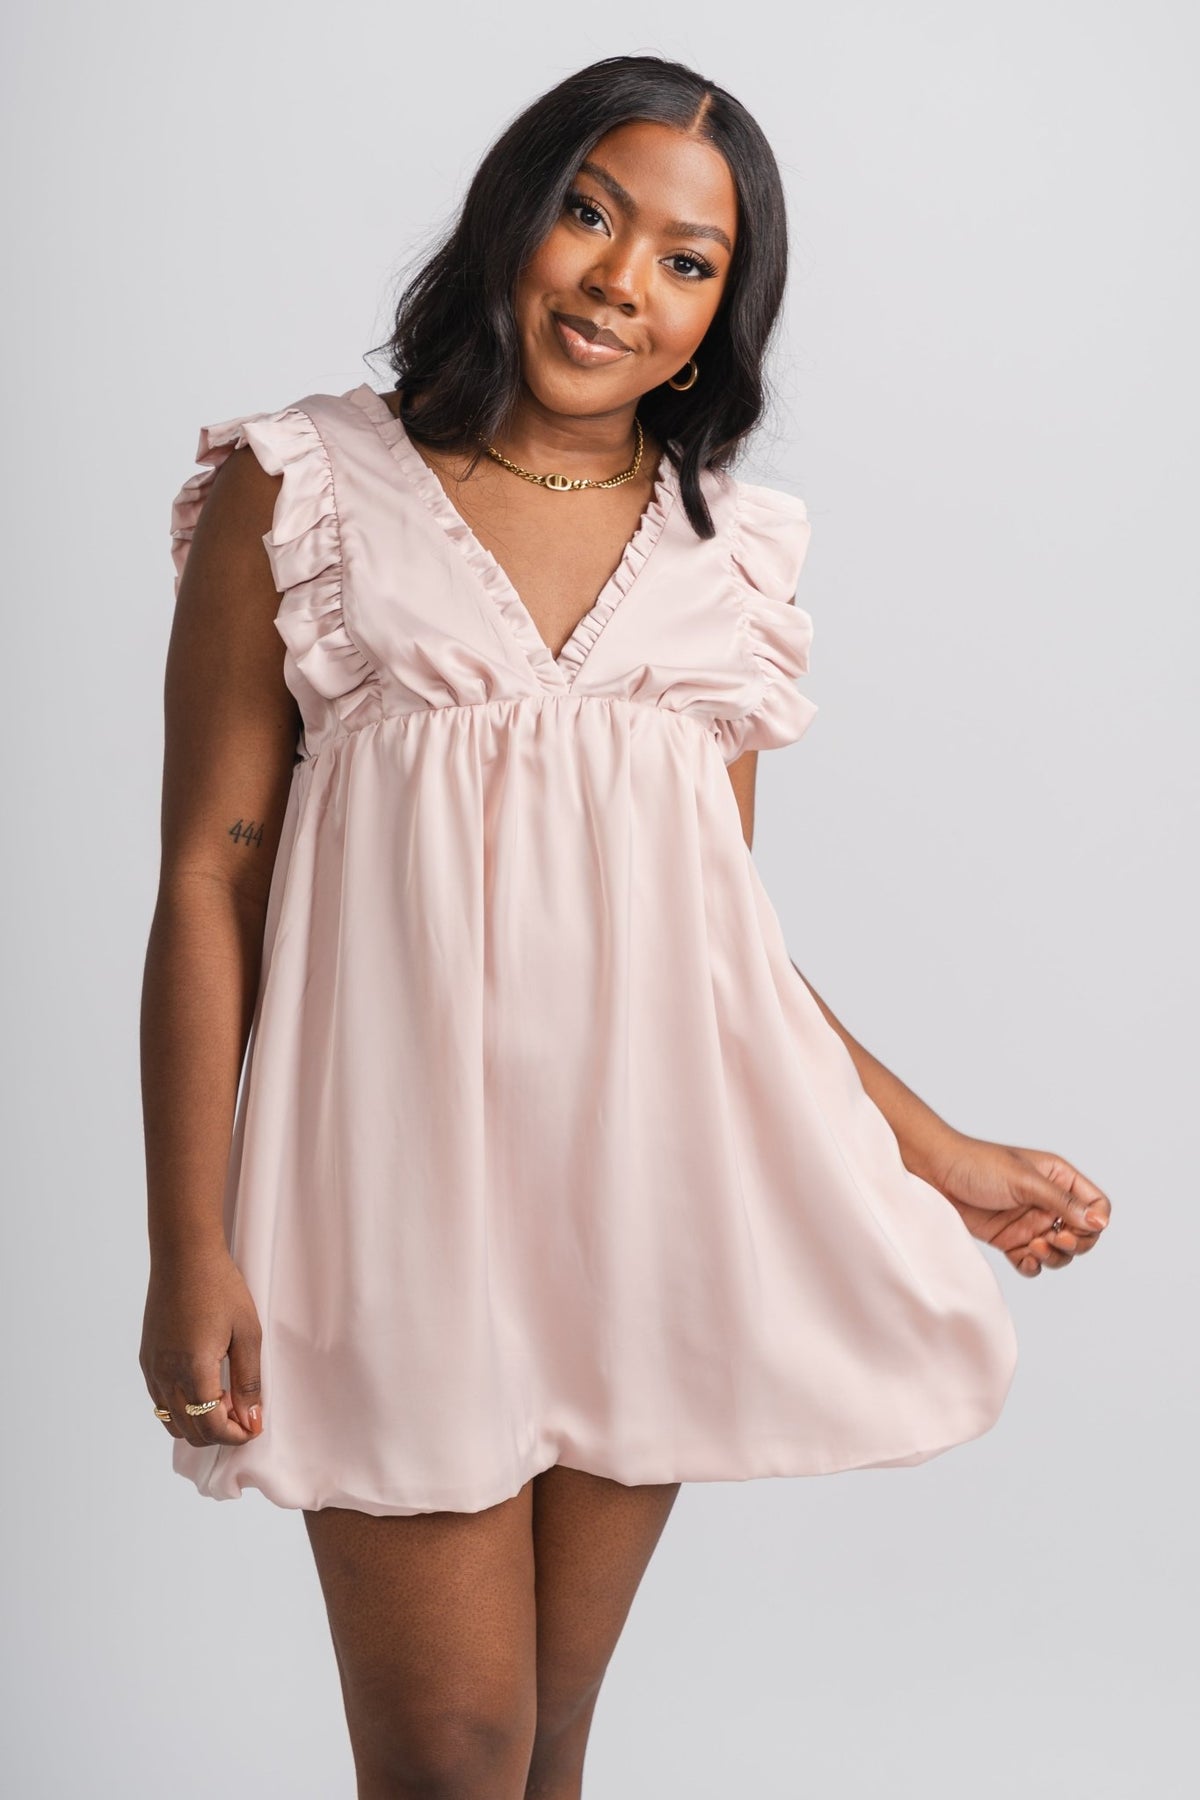 Ruffle baby doll dress pink - Stylish dress - Cute Easter Outfits at Lush Fashion Lounge Boutique in Oklahoma